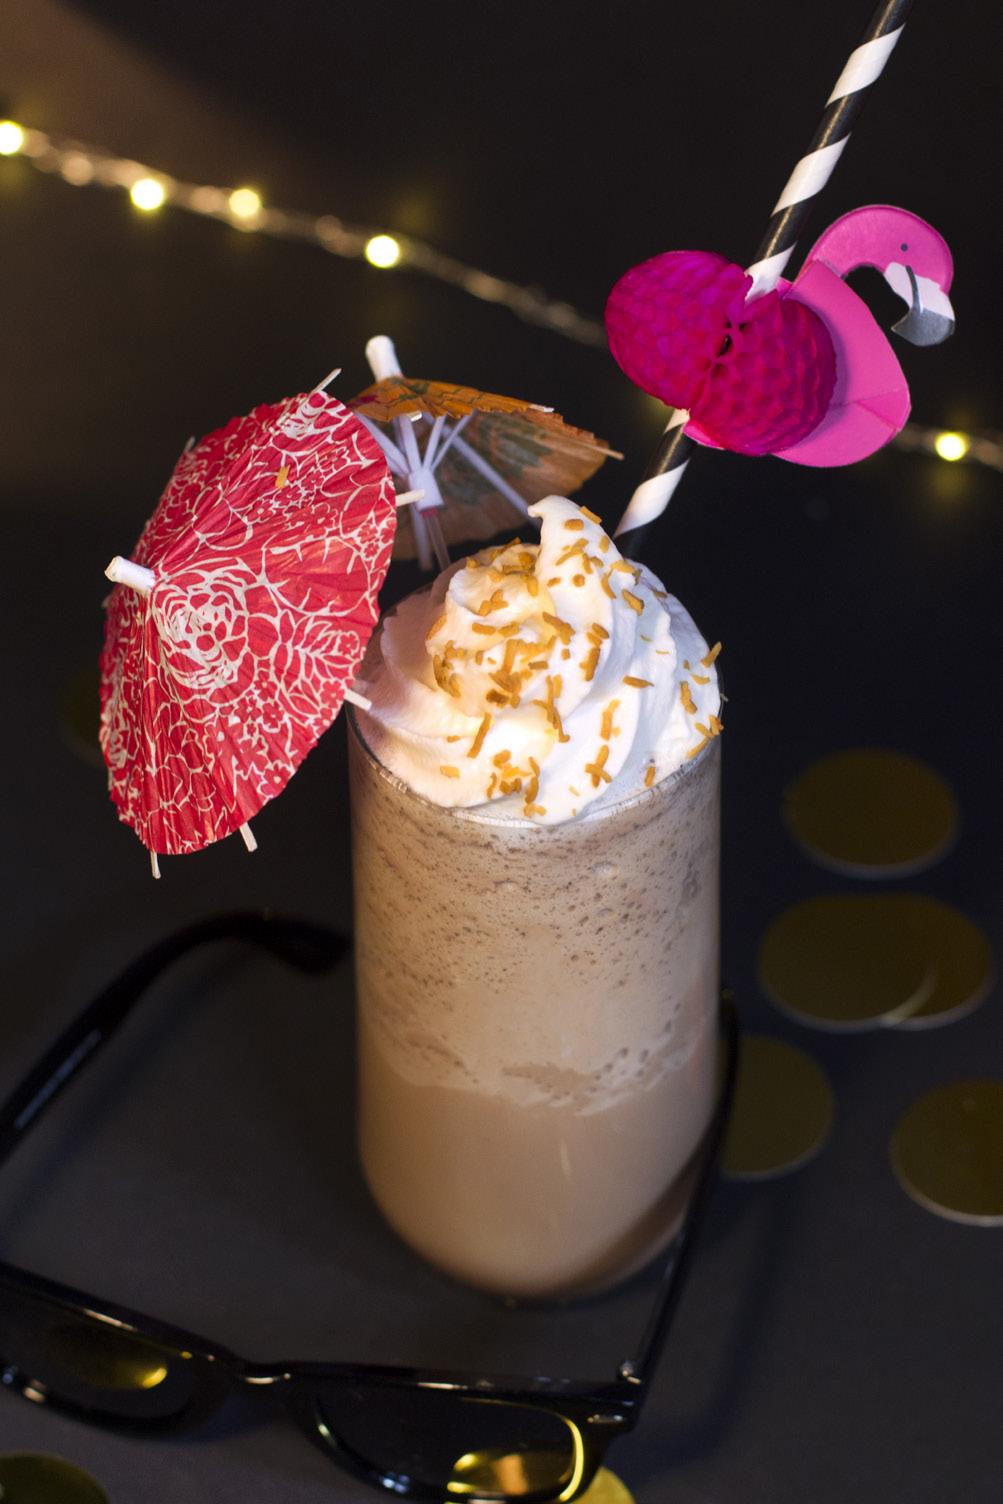 Hawaiian Roller Coaster Ride Blended Mocha Take a roller coaster ride with Lilo and Stitch with this Hawaiian salted caramel Kona mocha blended coffee!